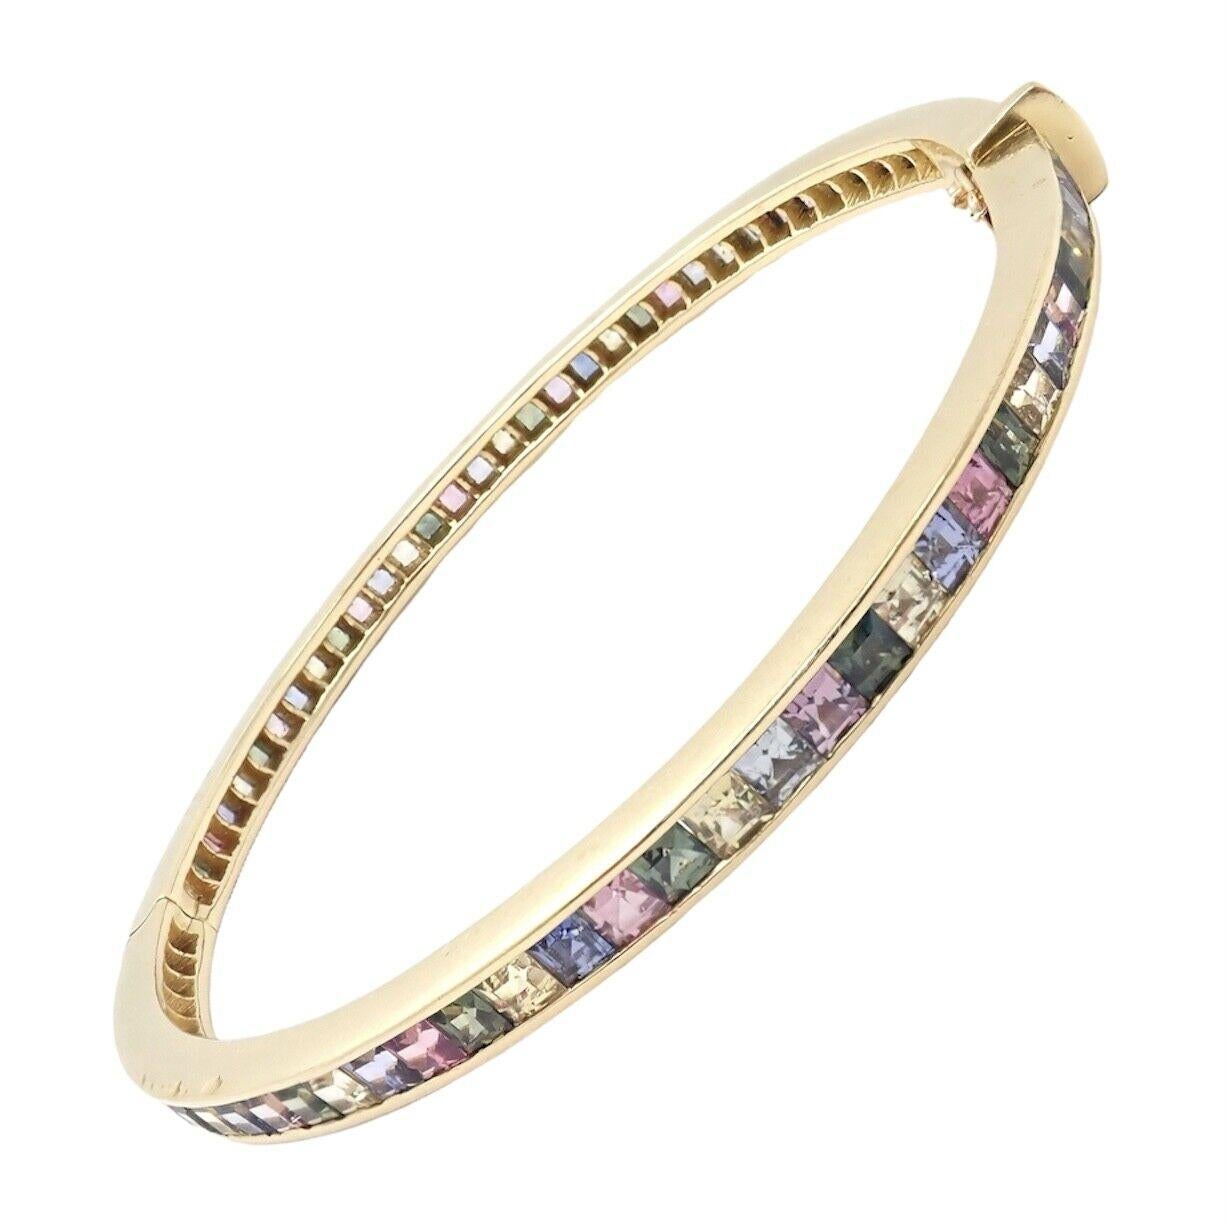 Julius Cohen Sapphire Pastel Color Stone Yellow Gold Bangle Bracelet In Excellent Condition For Sale In Holland, PA